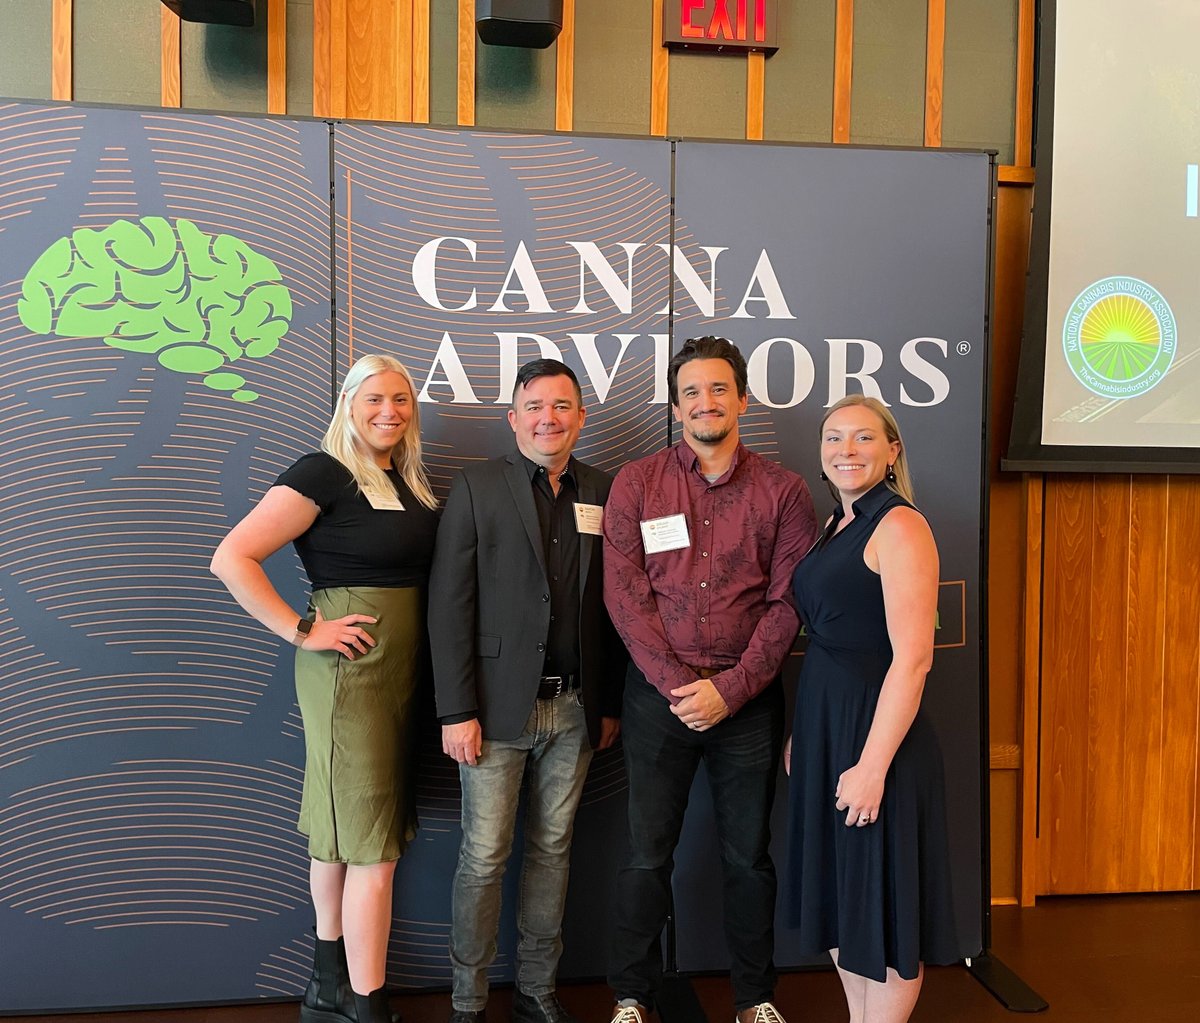 We’ve had a great time touring the Empire State this week with our friends at @CannaAdvisors during the Insights and Influencers: NY Opportunity Tour this week. Quick team photo before things get going for tonight’s last stop in Brooklyn!